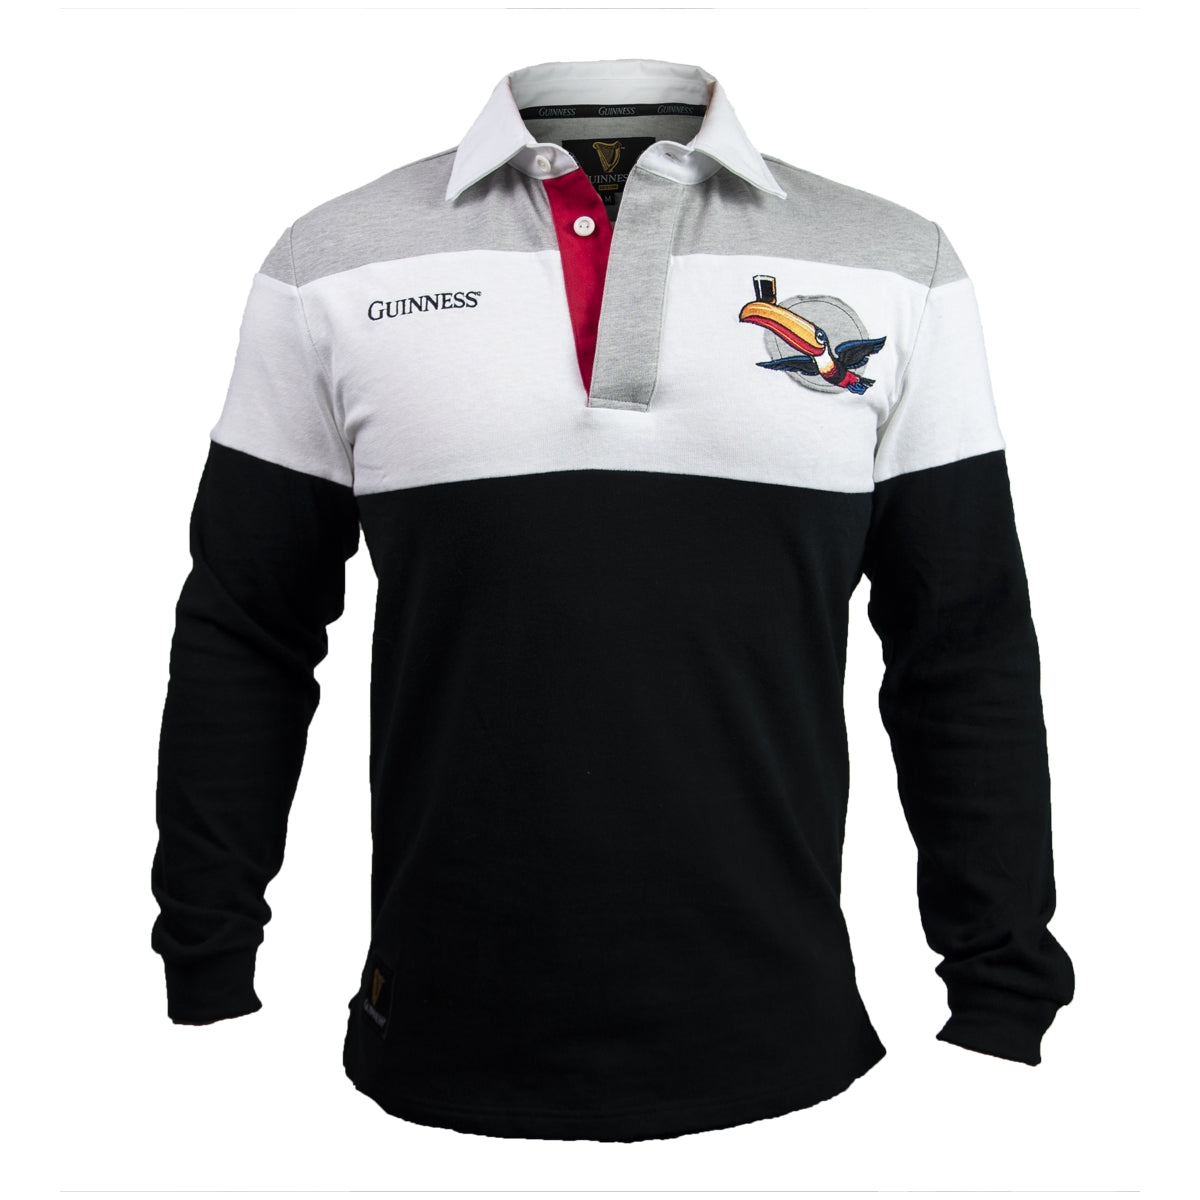 A men's Guinness Toucan Rugby Jersey in red, white, and black.